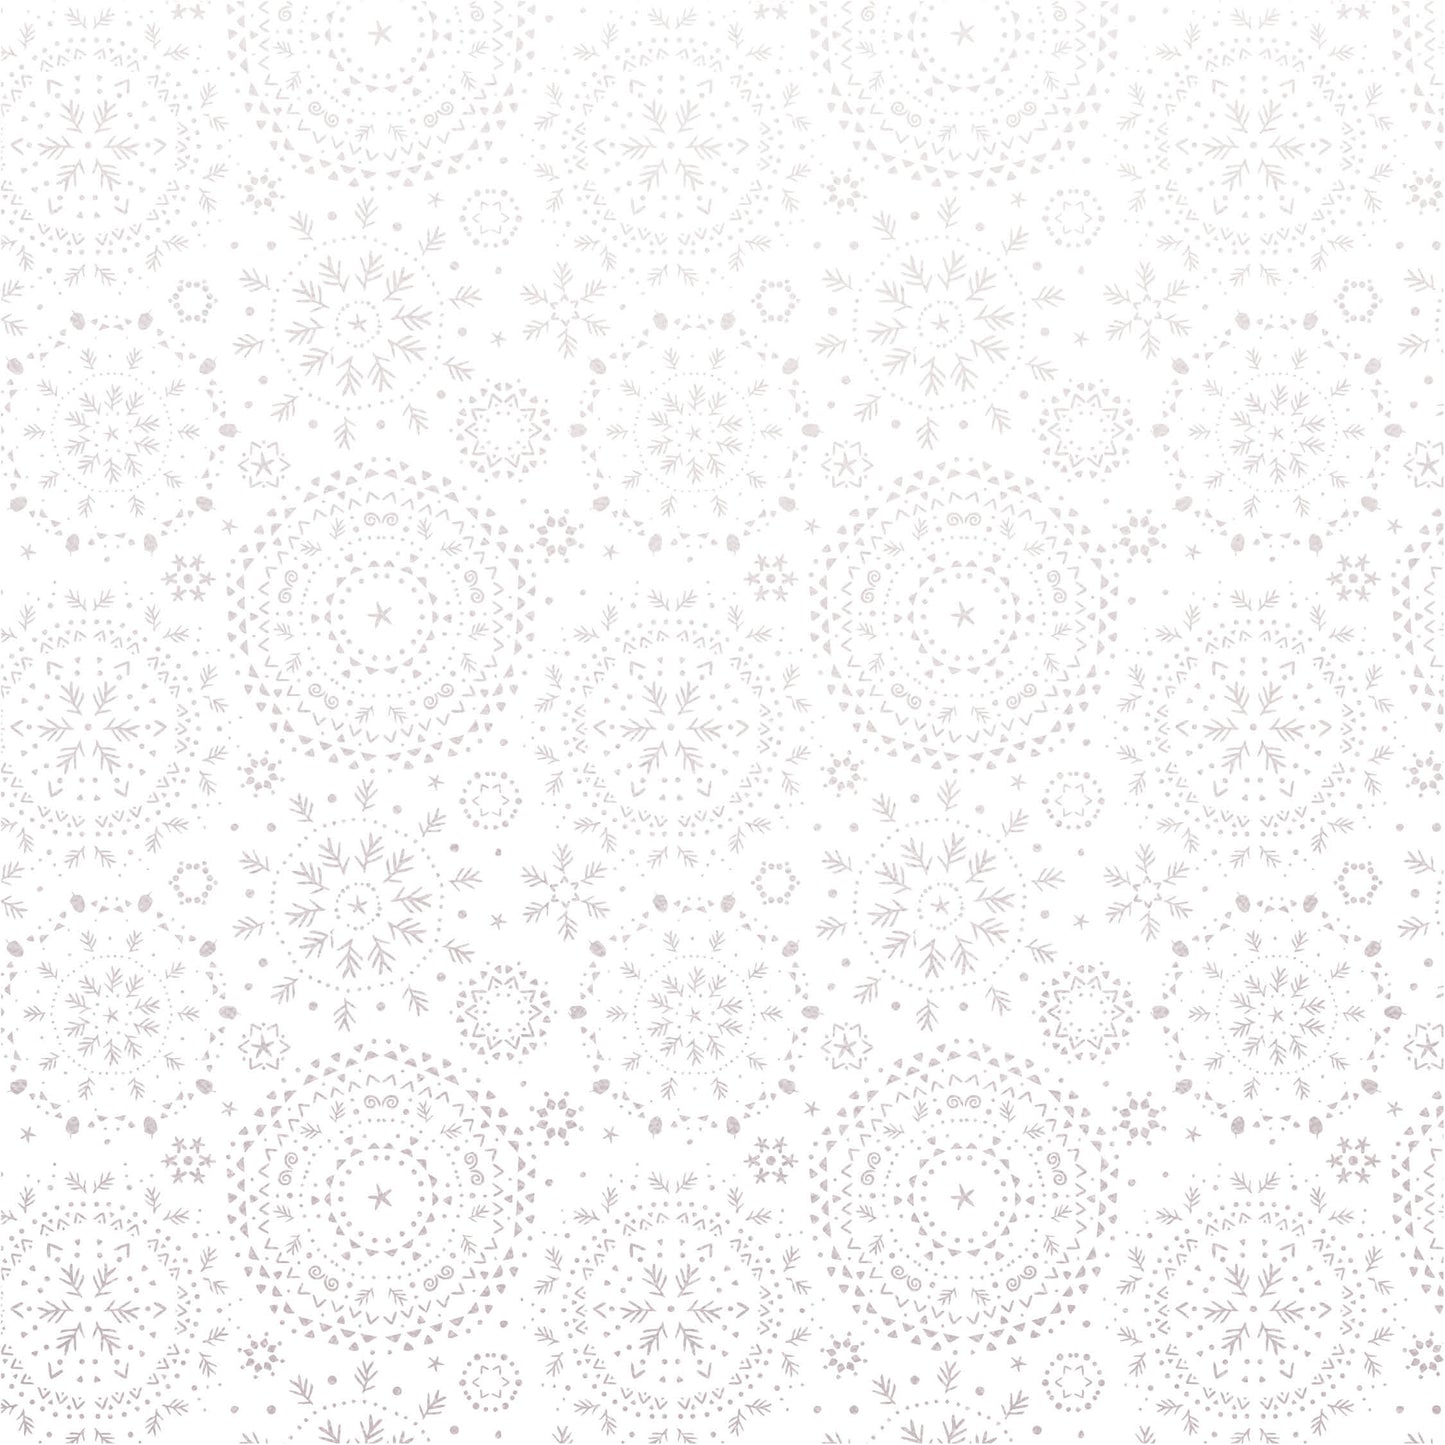 Whimsy Wishes 12x12 Scrapbook Paper - FALLING SNOW